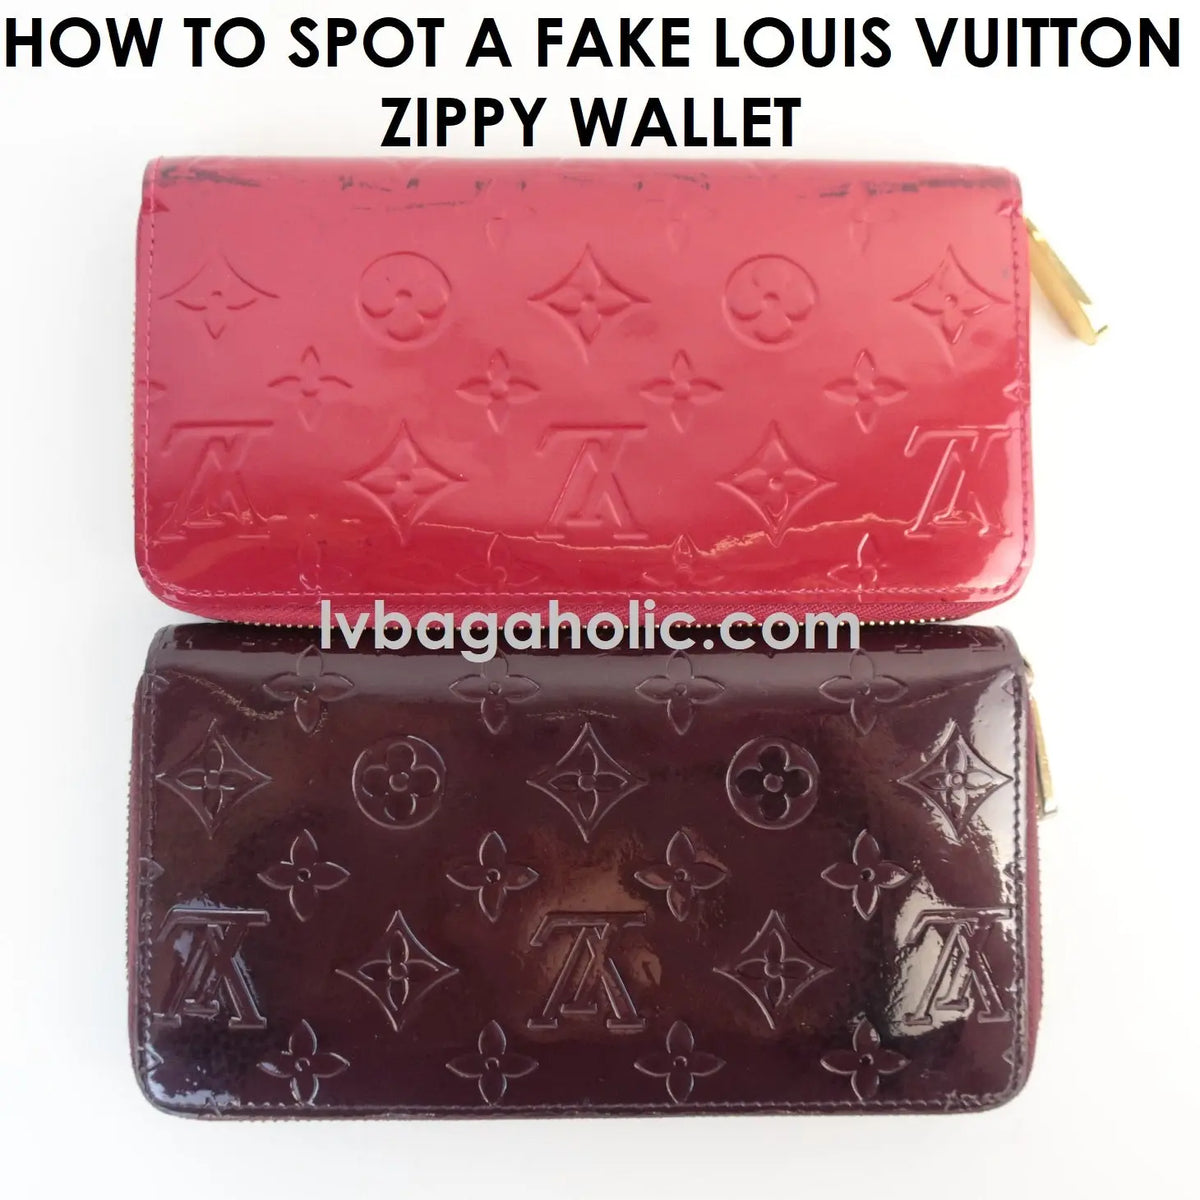 Louis Vuitton Wallet How To Tell If Fake